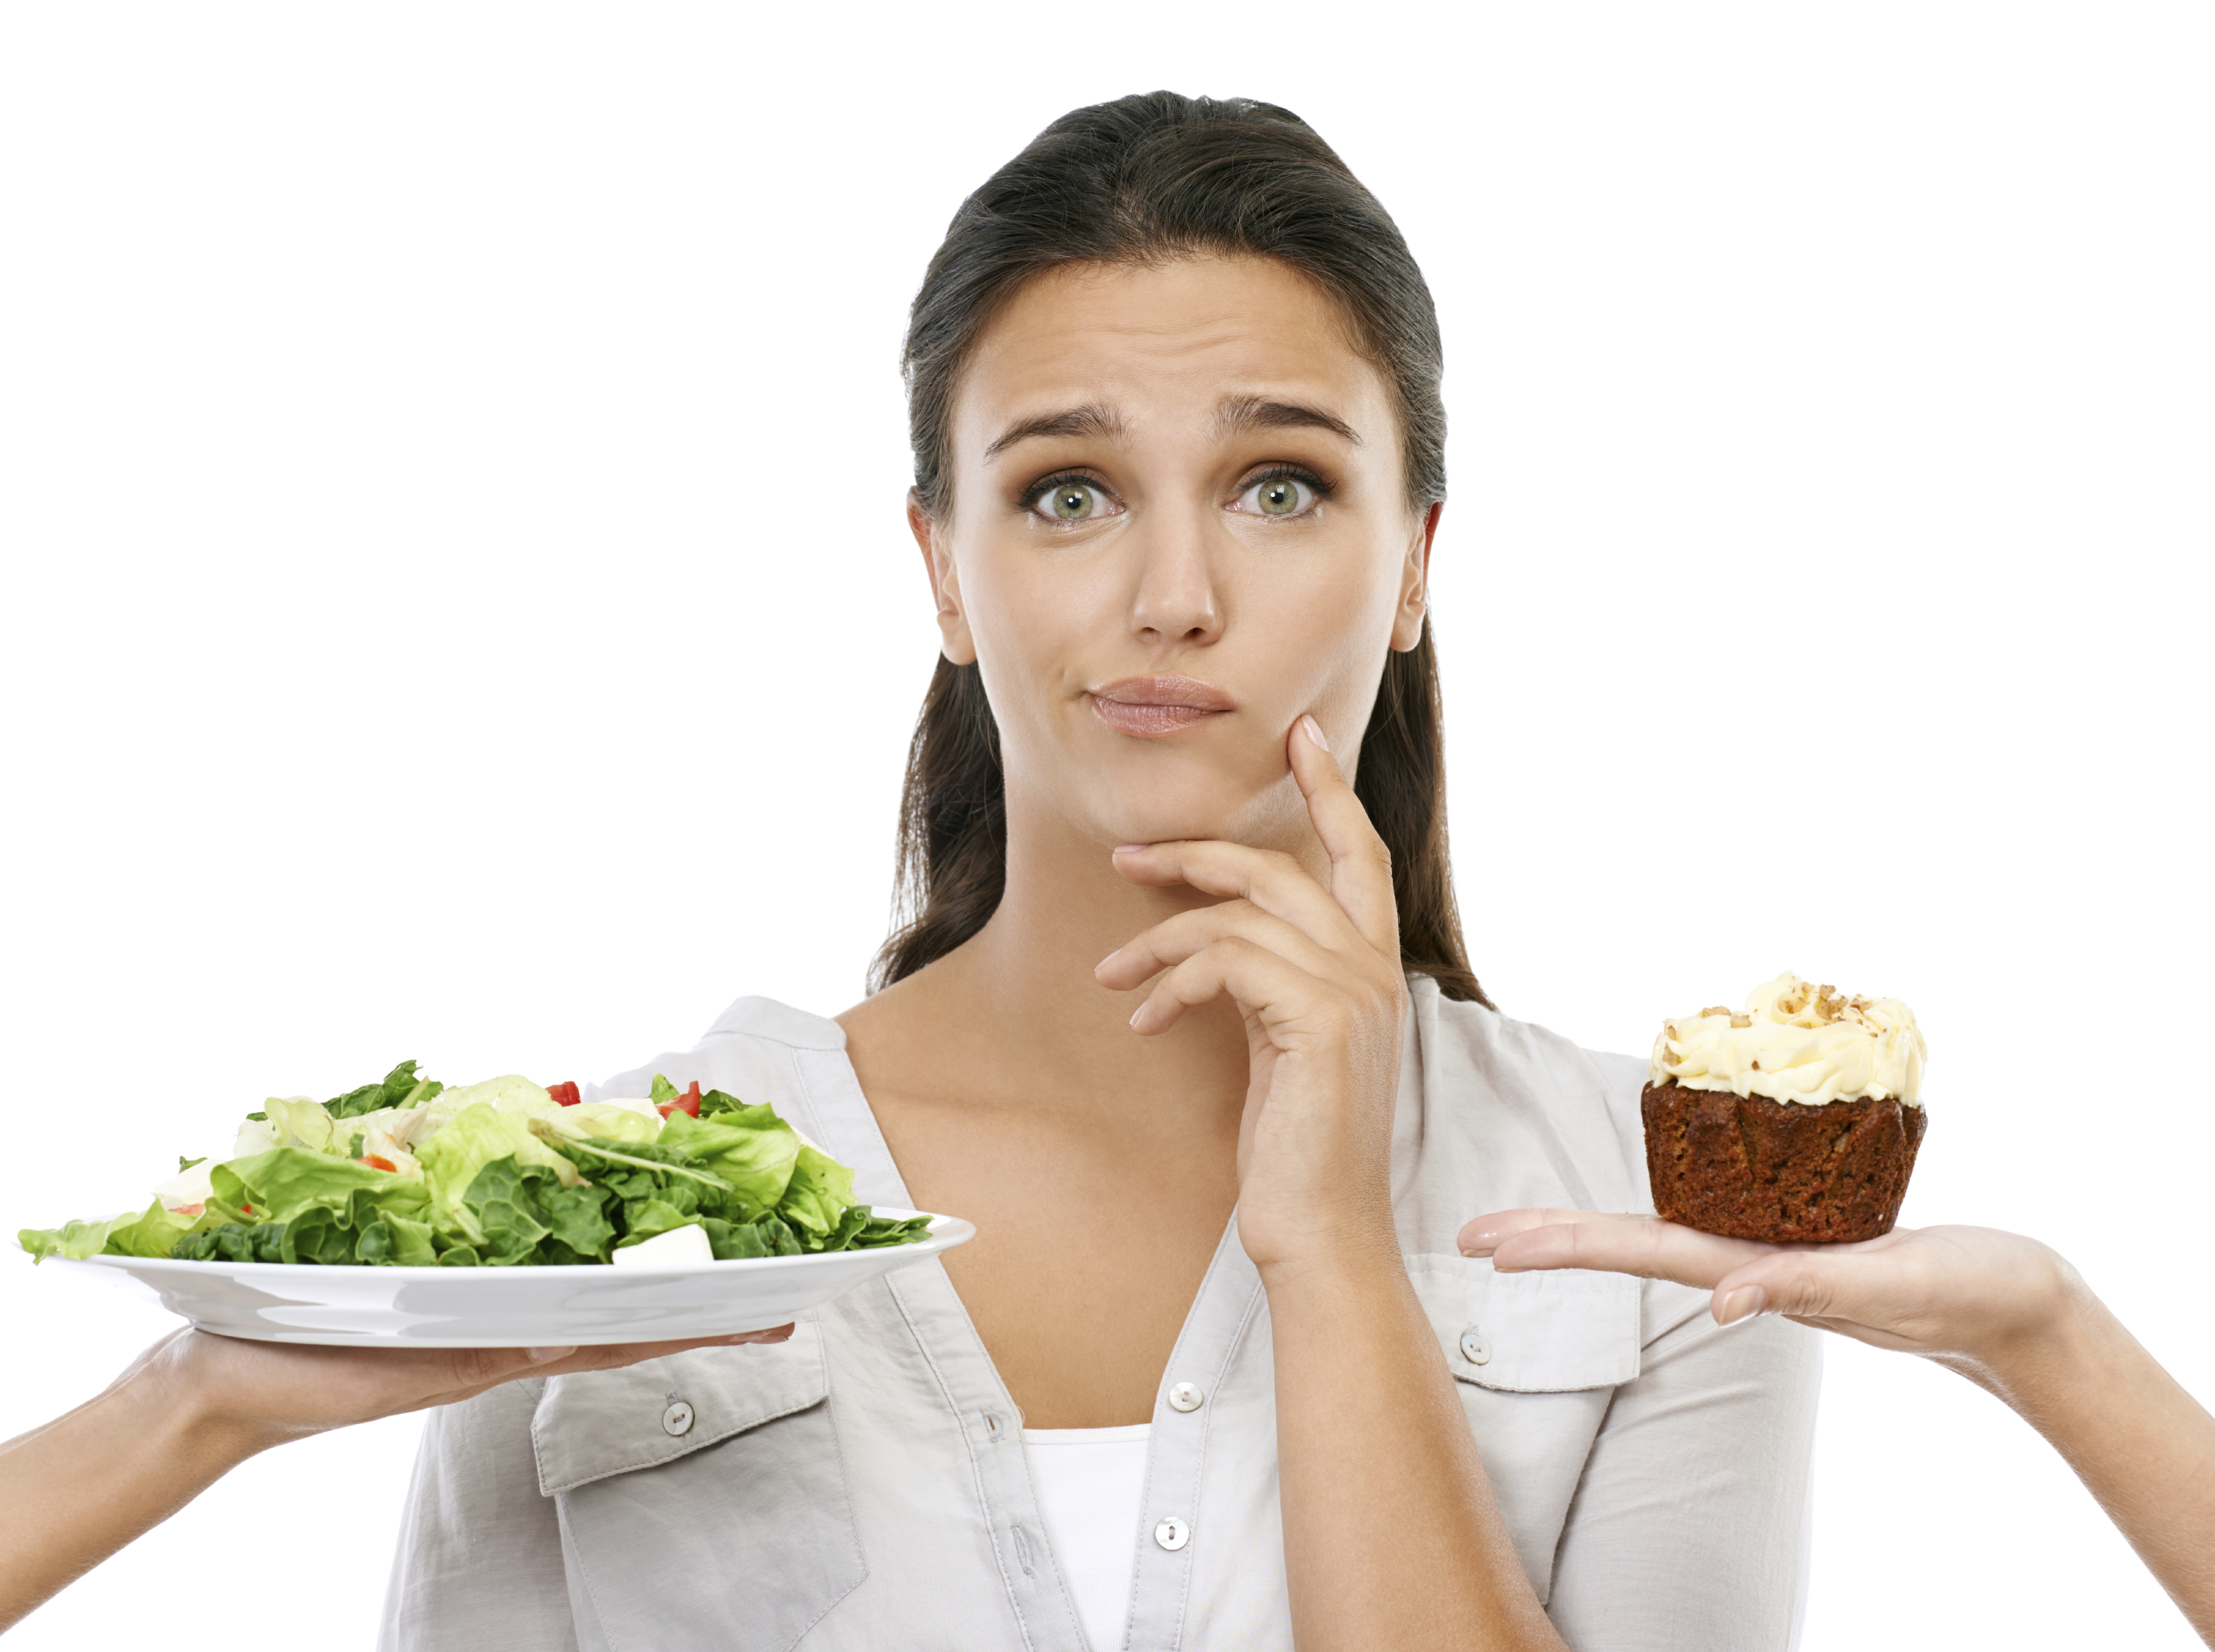 Studio shot of a young woman choosing between a healthy and unhealthy diet